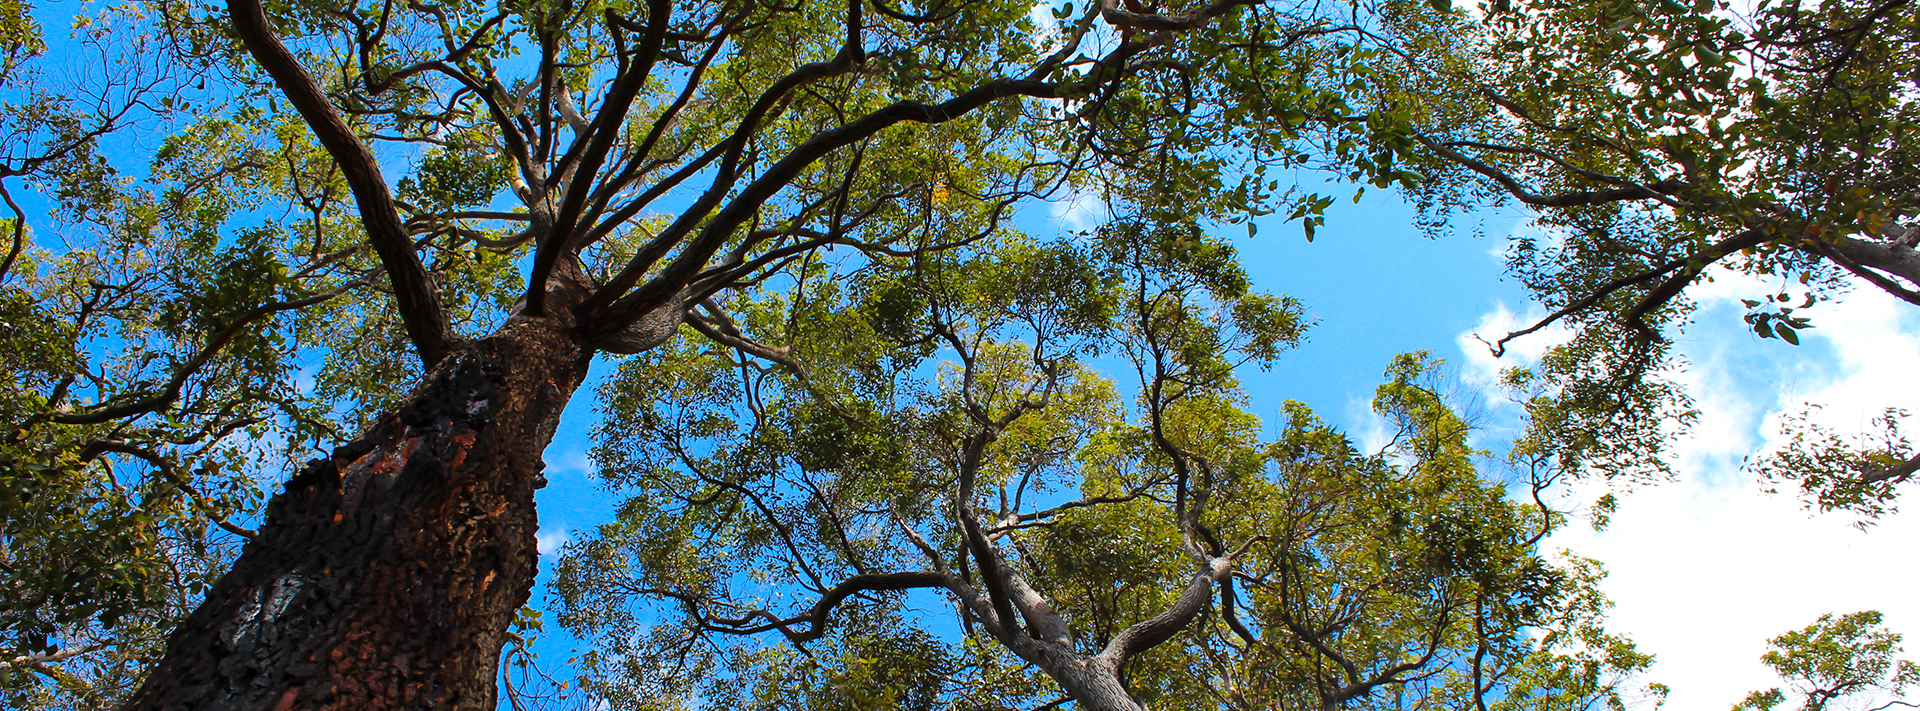 Looking up at jarrah trees against the sky